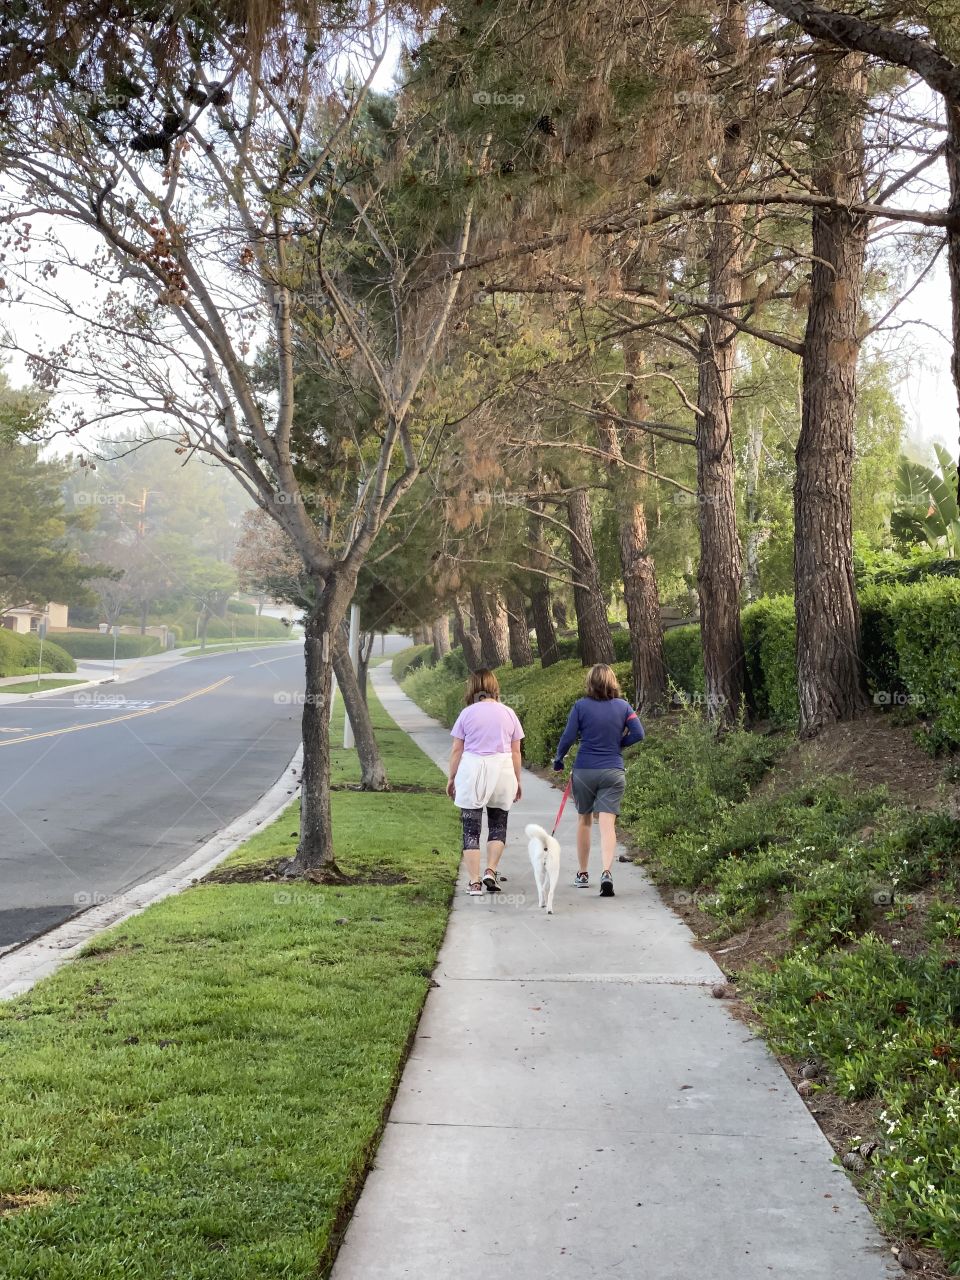 A couple of women walking their dog on a sidewalk around the neighborhood in early morning during Spring 